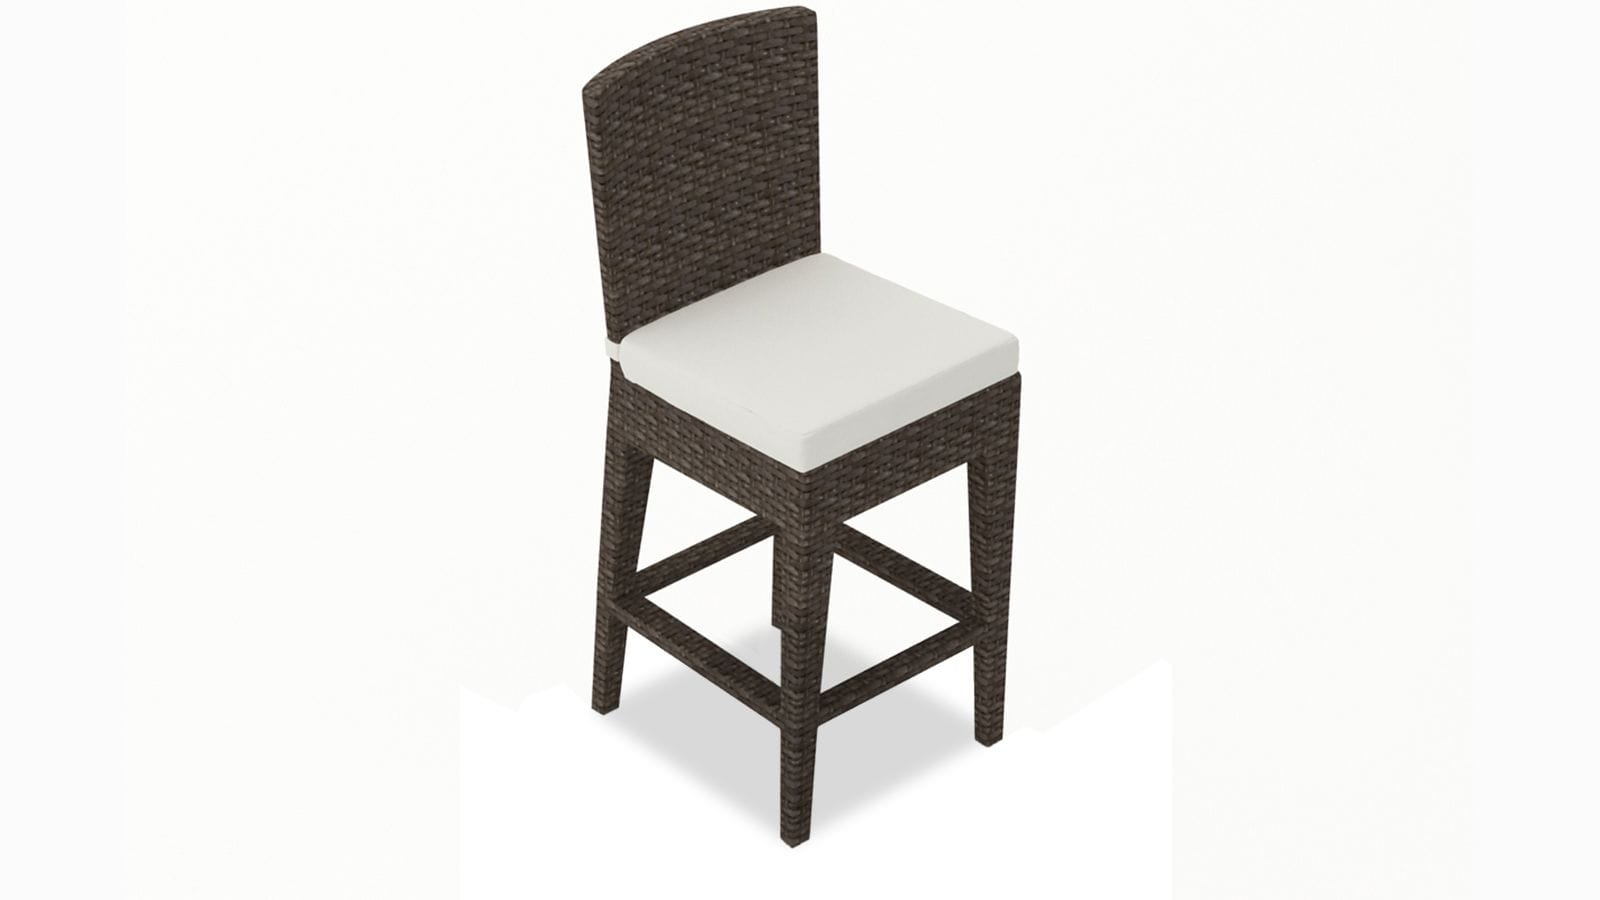 Harmonia Living Outdoor Barstool Canvas Natural Harmonia Living - Arden Counter Height Chair | HL-ARD-CH-CHC